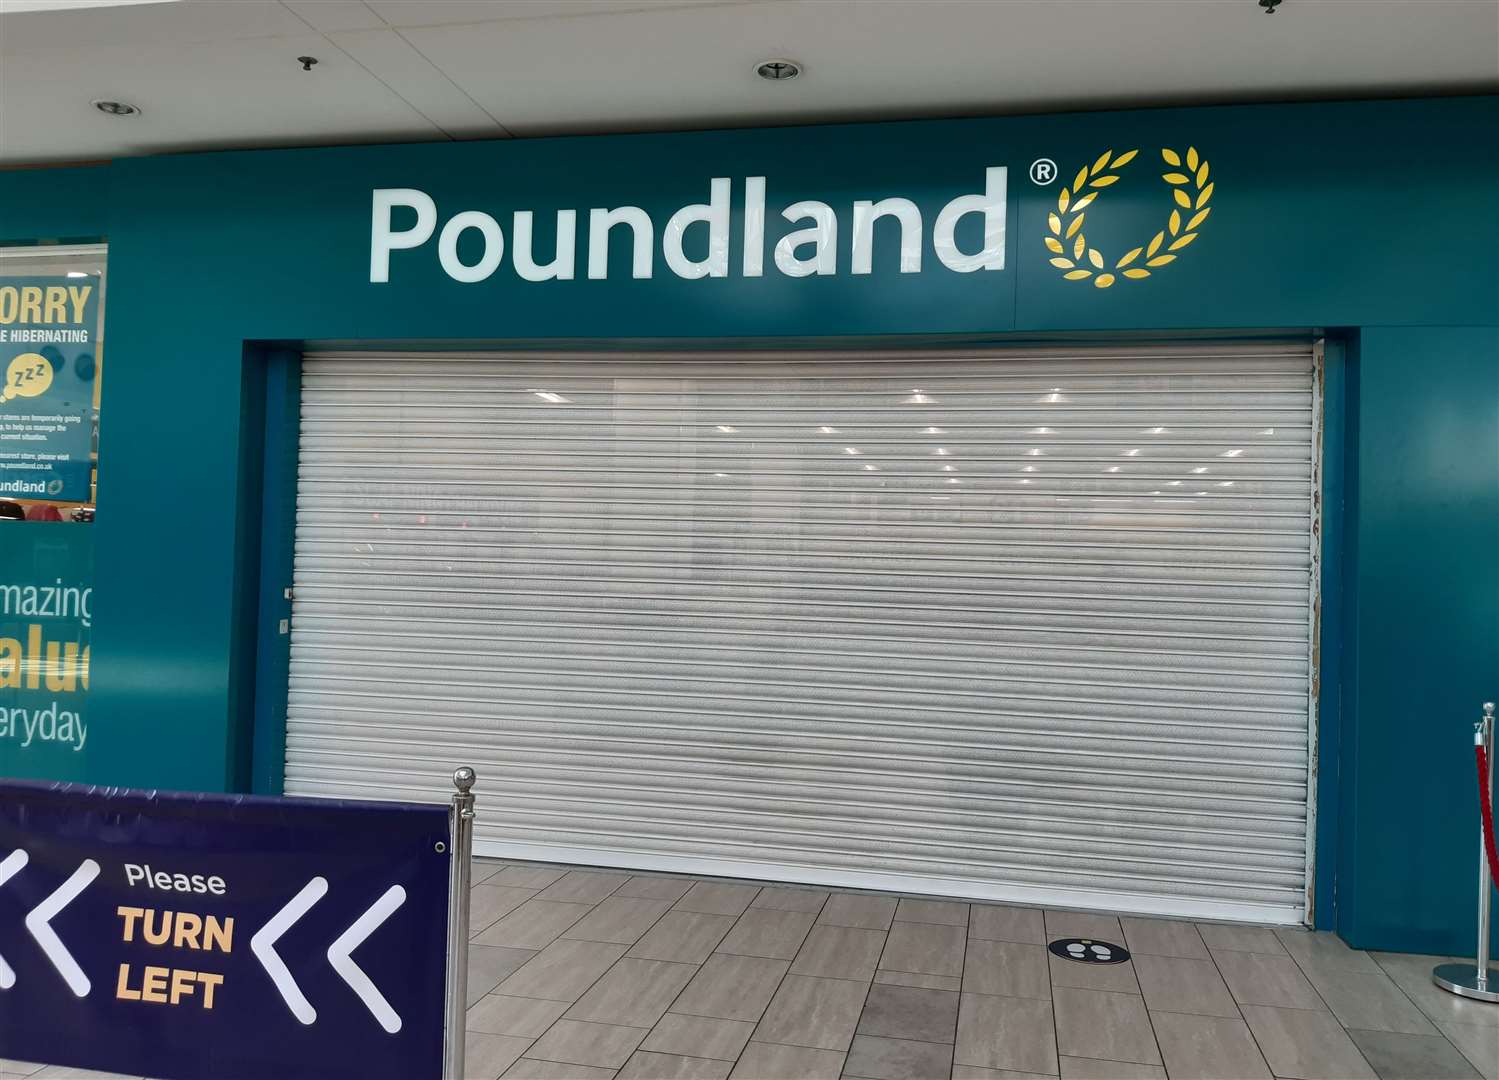 Ashford's Poundland had reopened in June following the first lockdown, but shut again in August